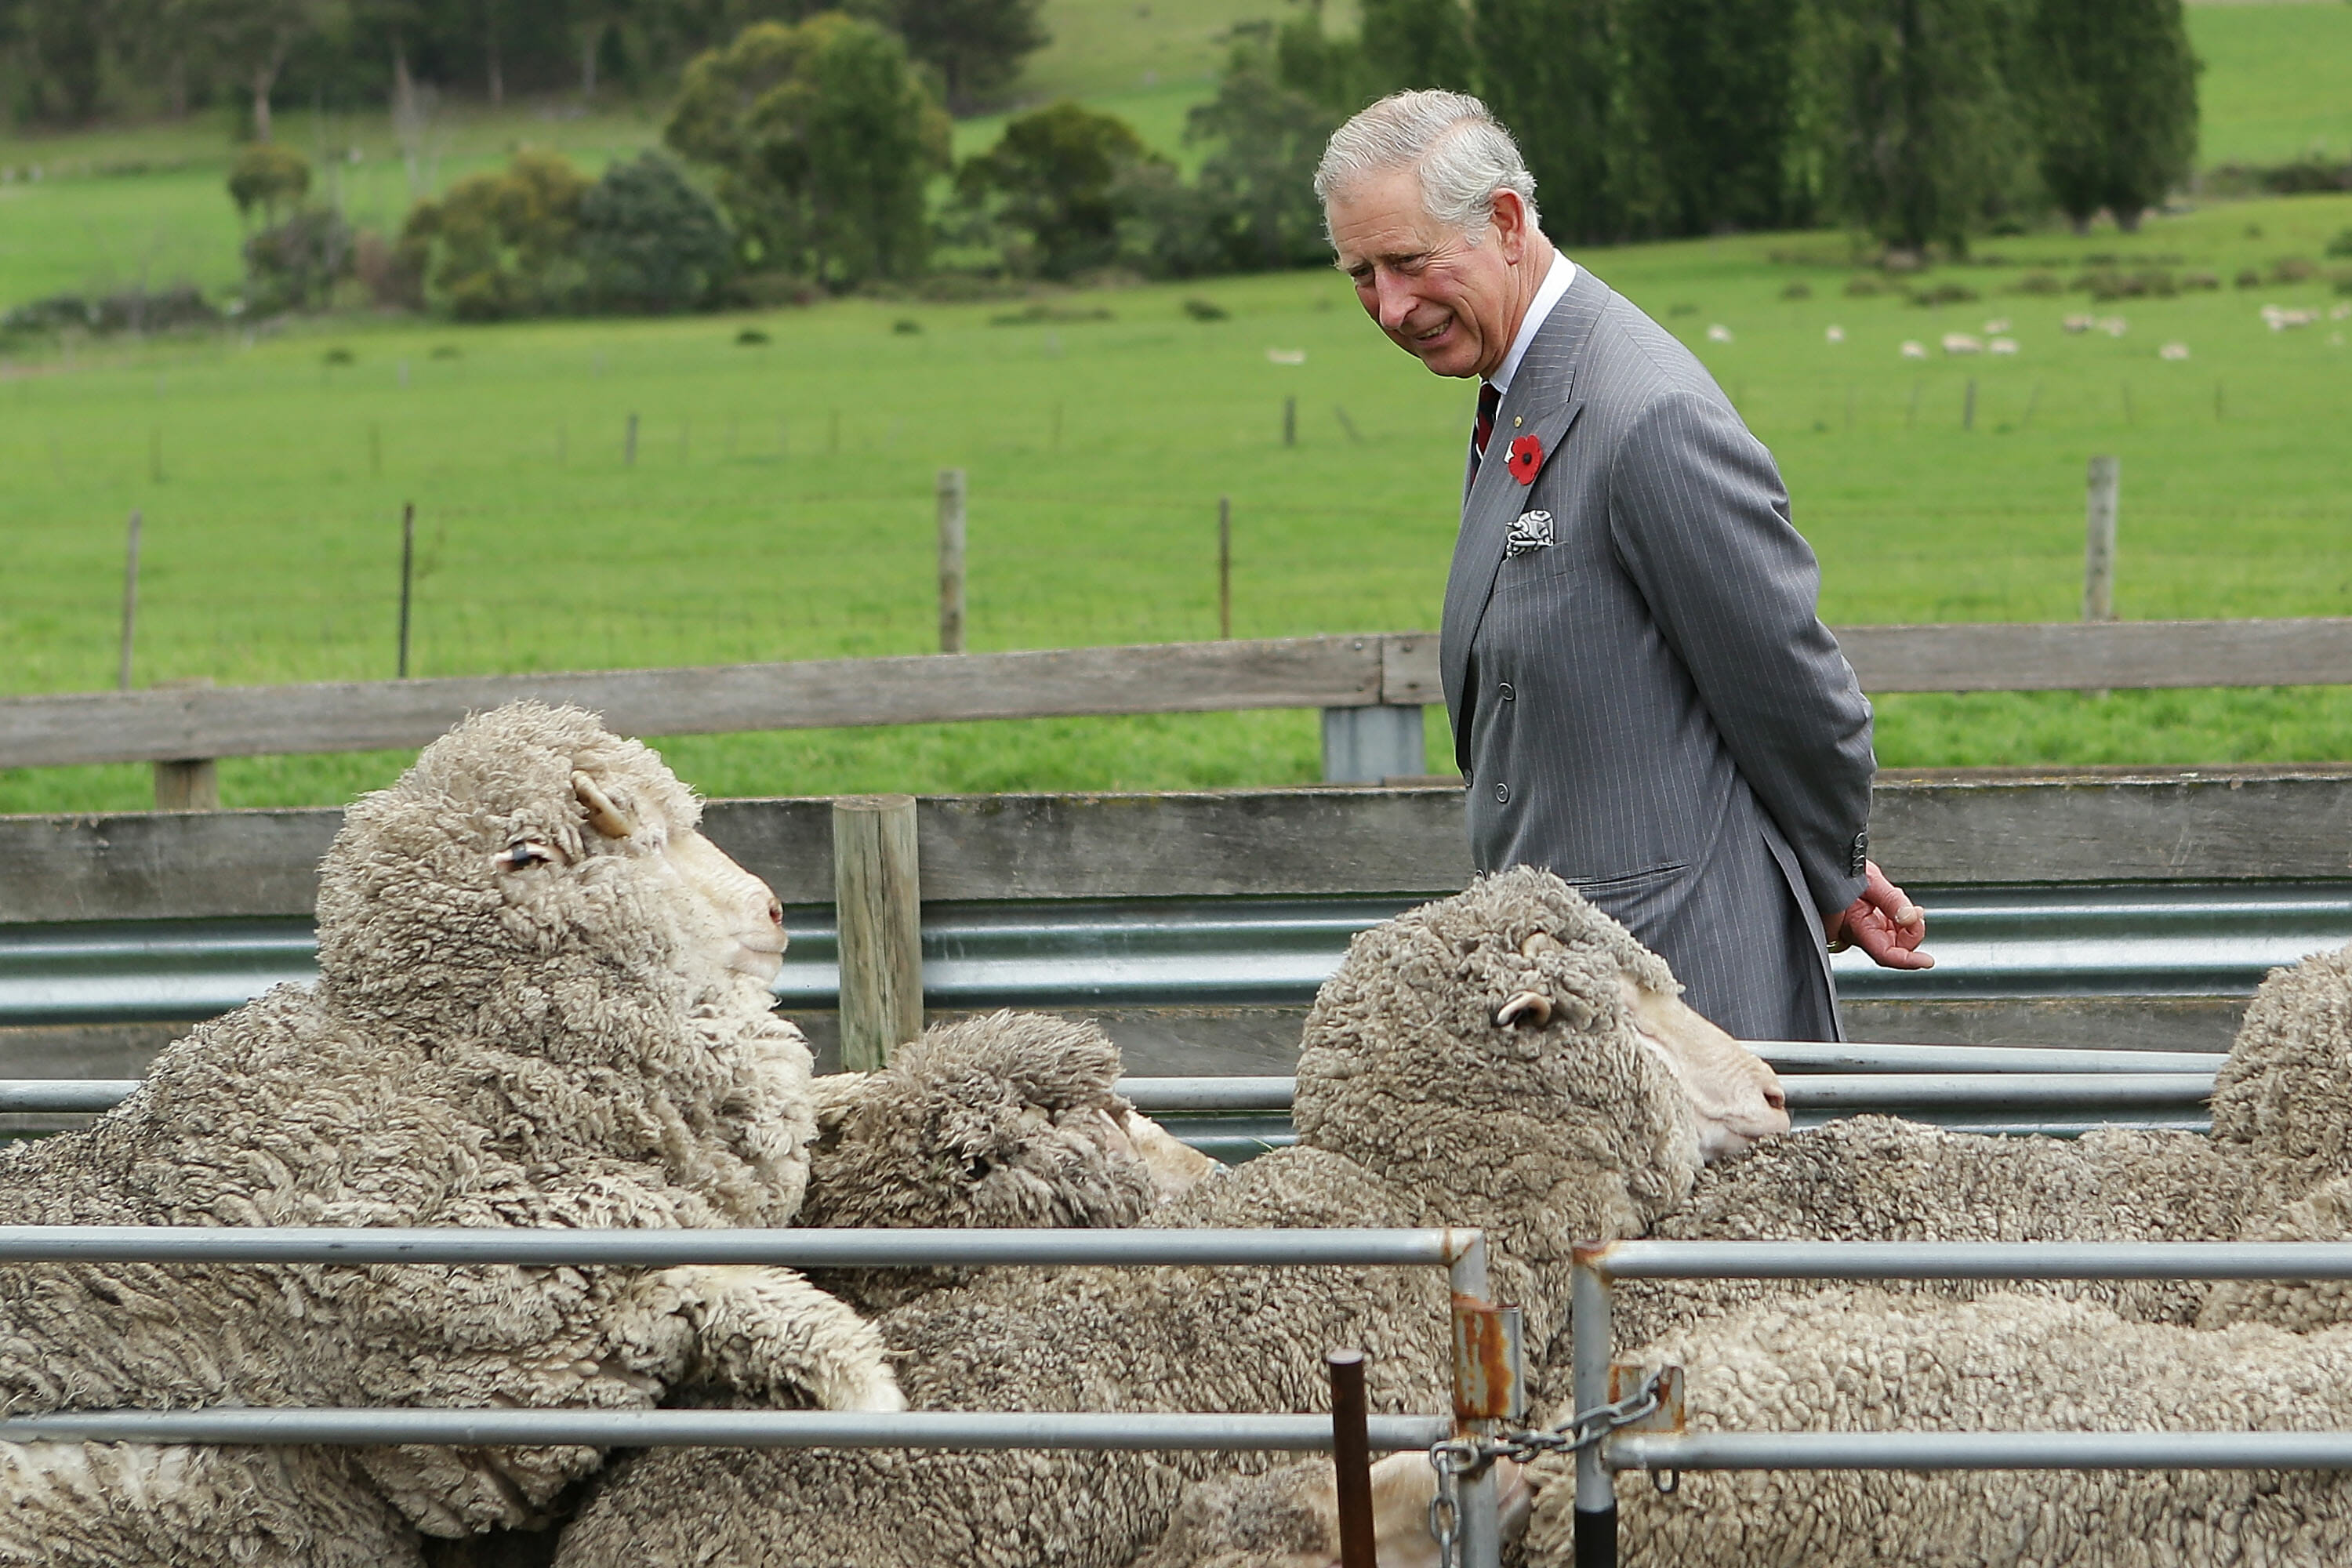 The Prince Of Wales And Duchess Of Cornwall Visit Australia – Day 4